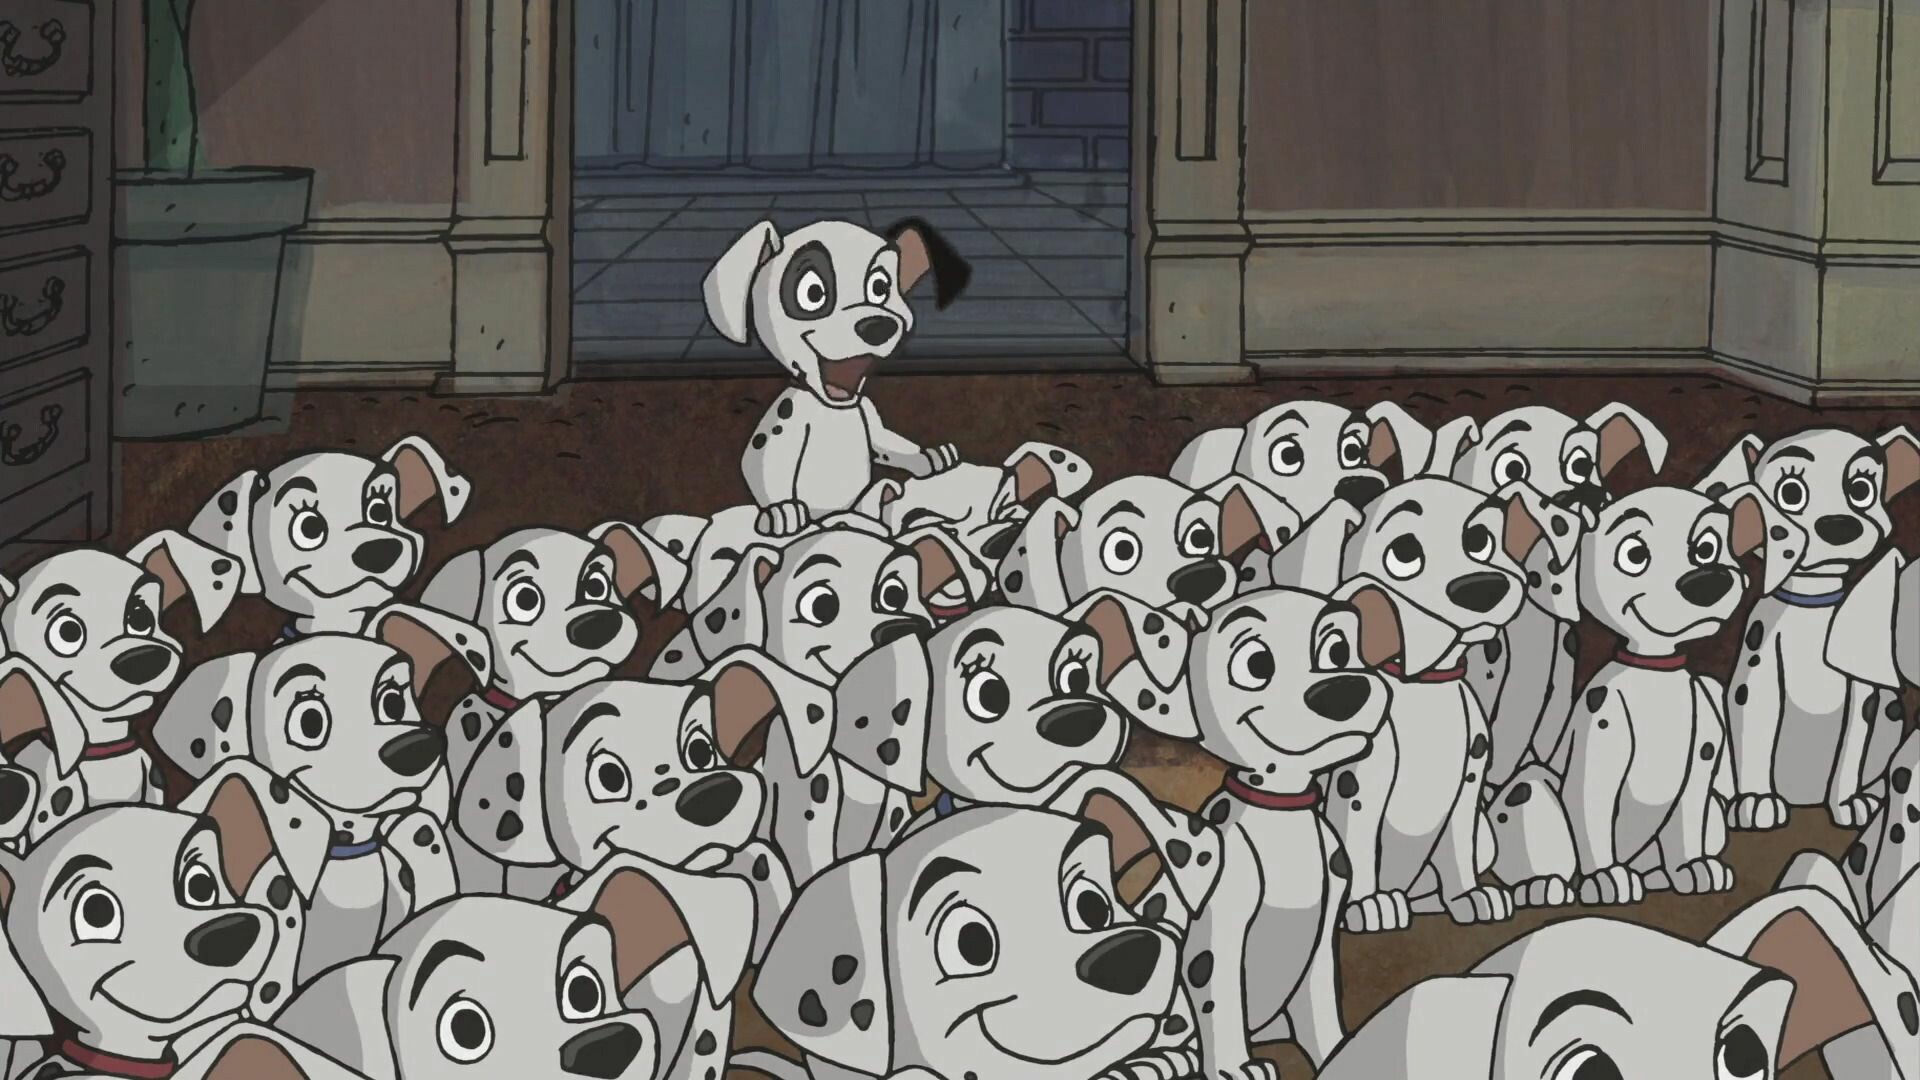 One Hundred and One Dalmatians: When a litter of dalmatian puppies are abducted by the minions of Cruella De Vil, the parents must find them before she uses them for a diabolical fashion statement. 1920x1080 Full HD Wallpaper.